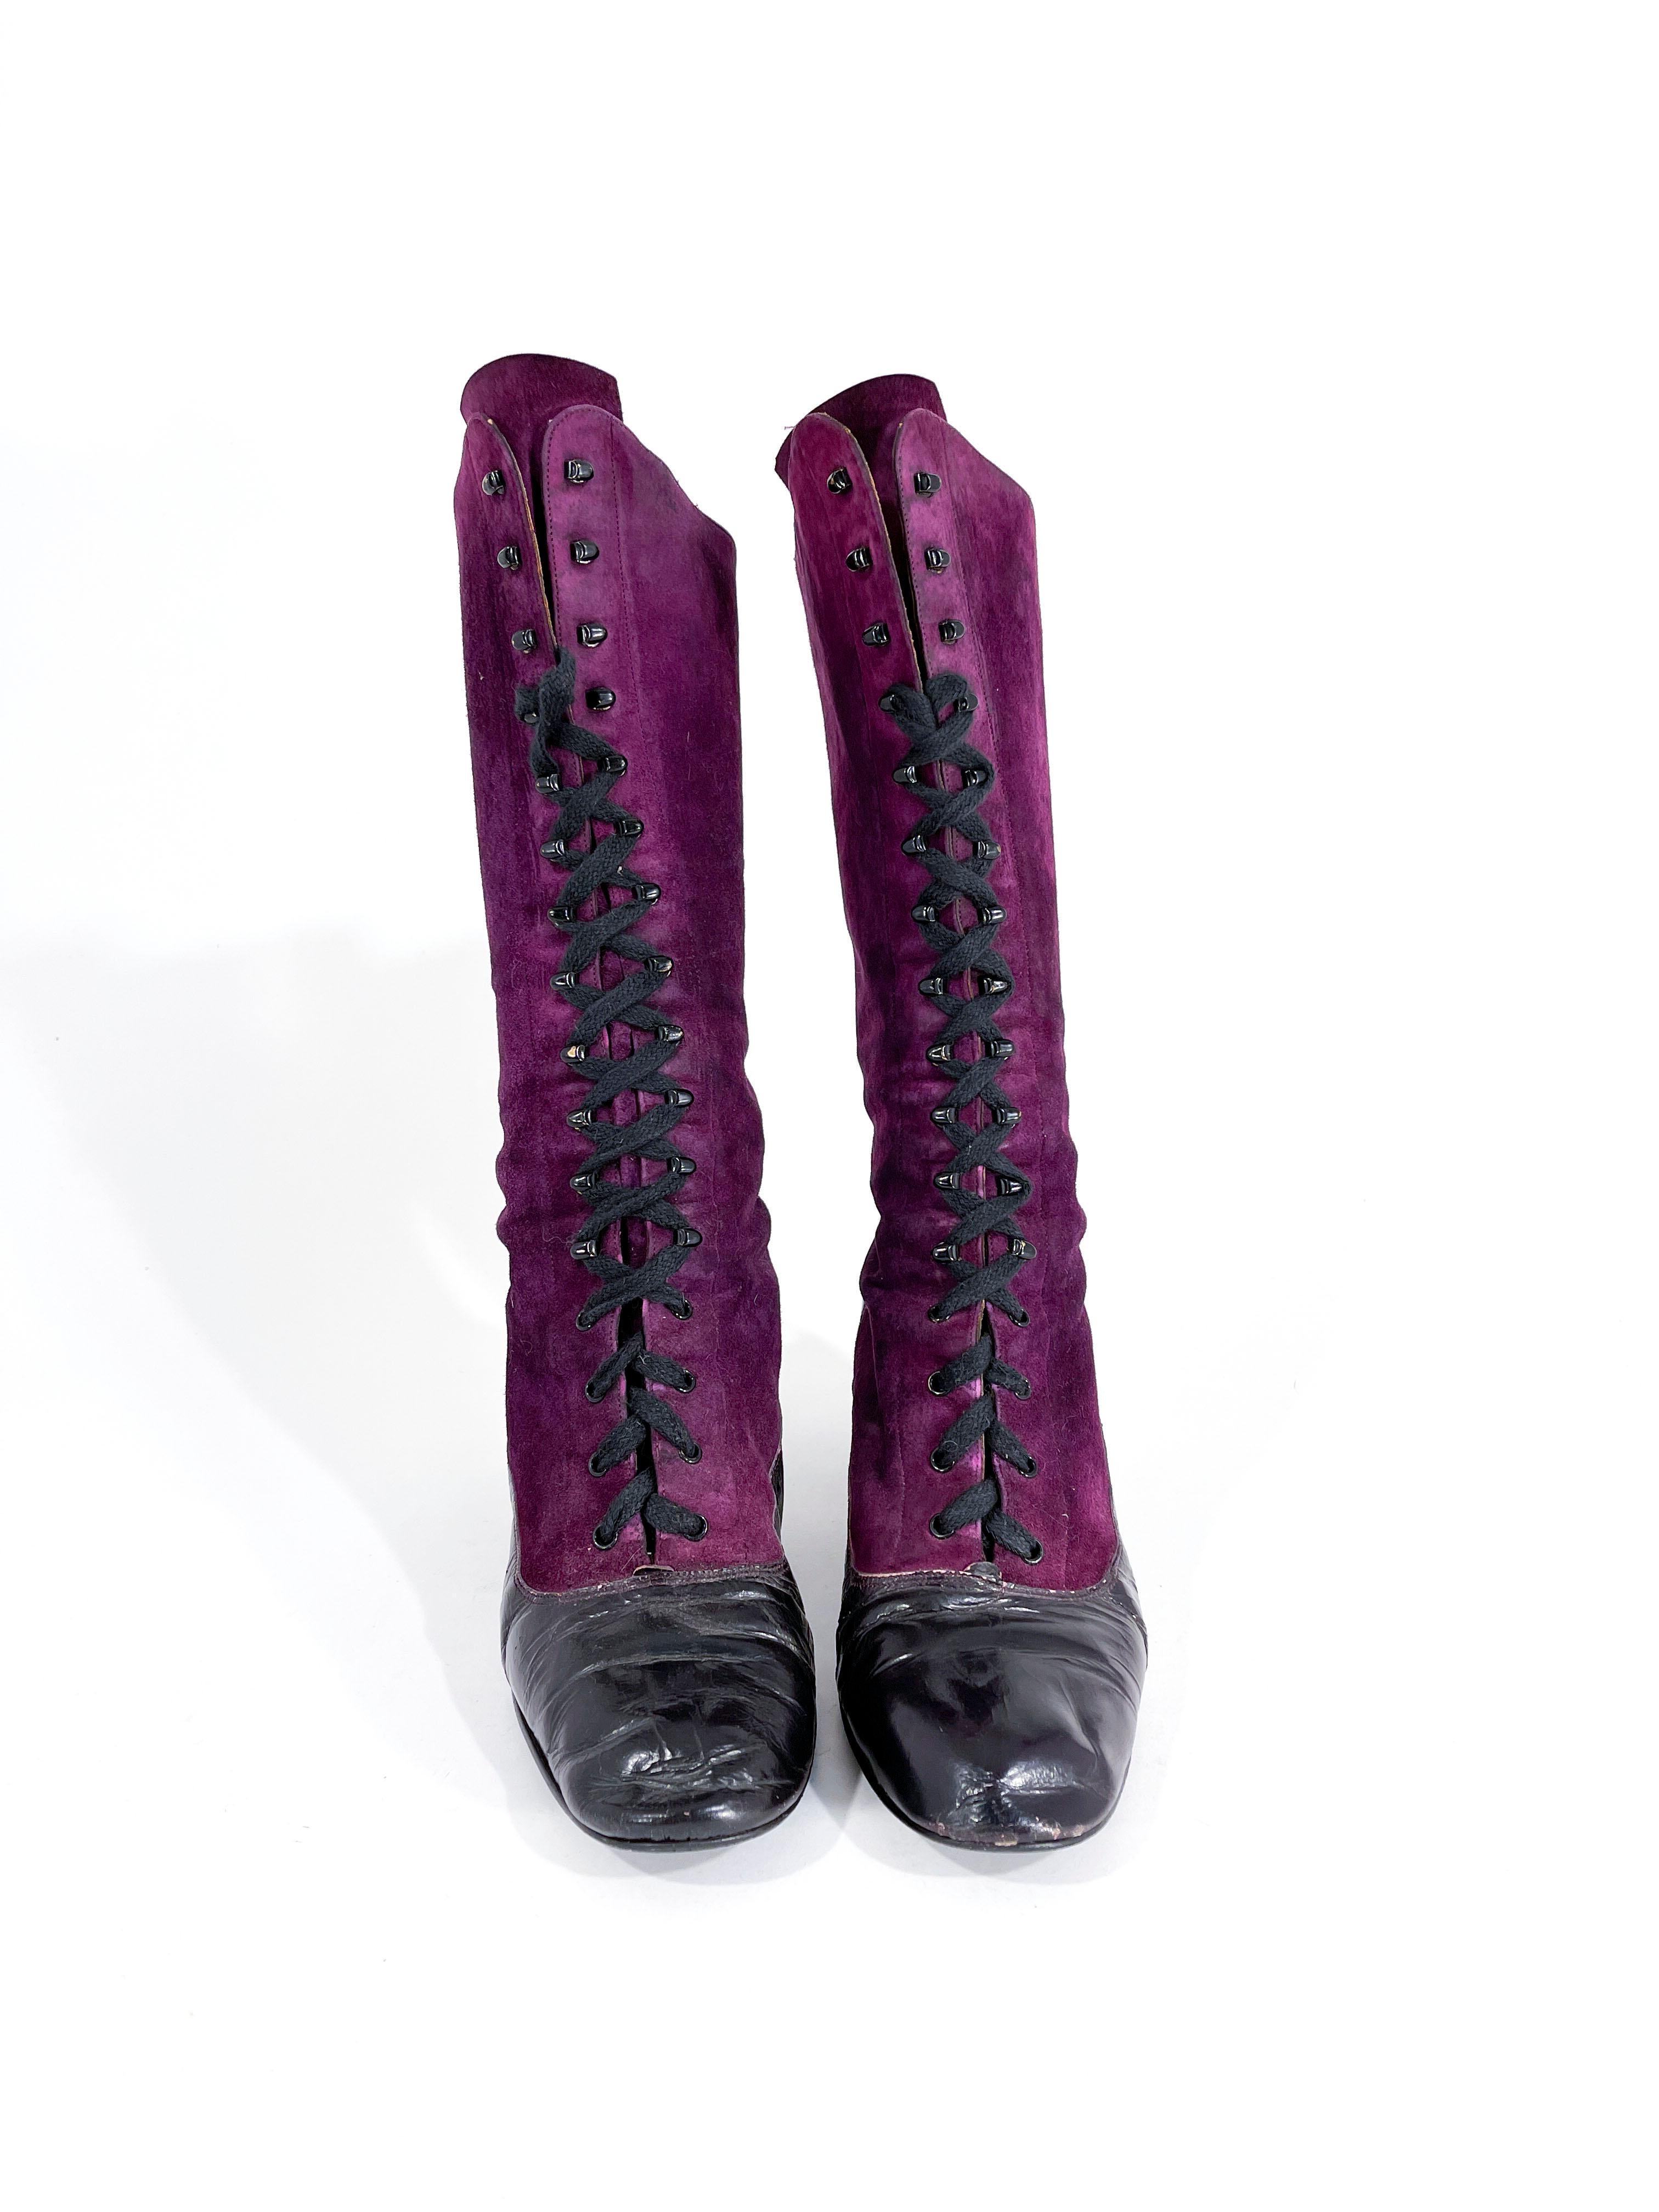 1970s purple suede and black leather Edwardian style boots that are mid-calf high. The front hat a lace up front with lace hooks and eyelets.